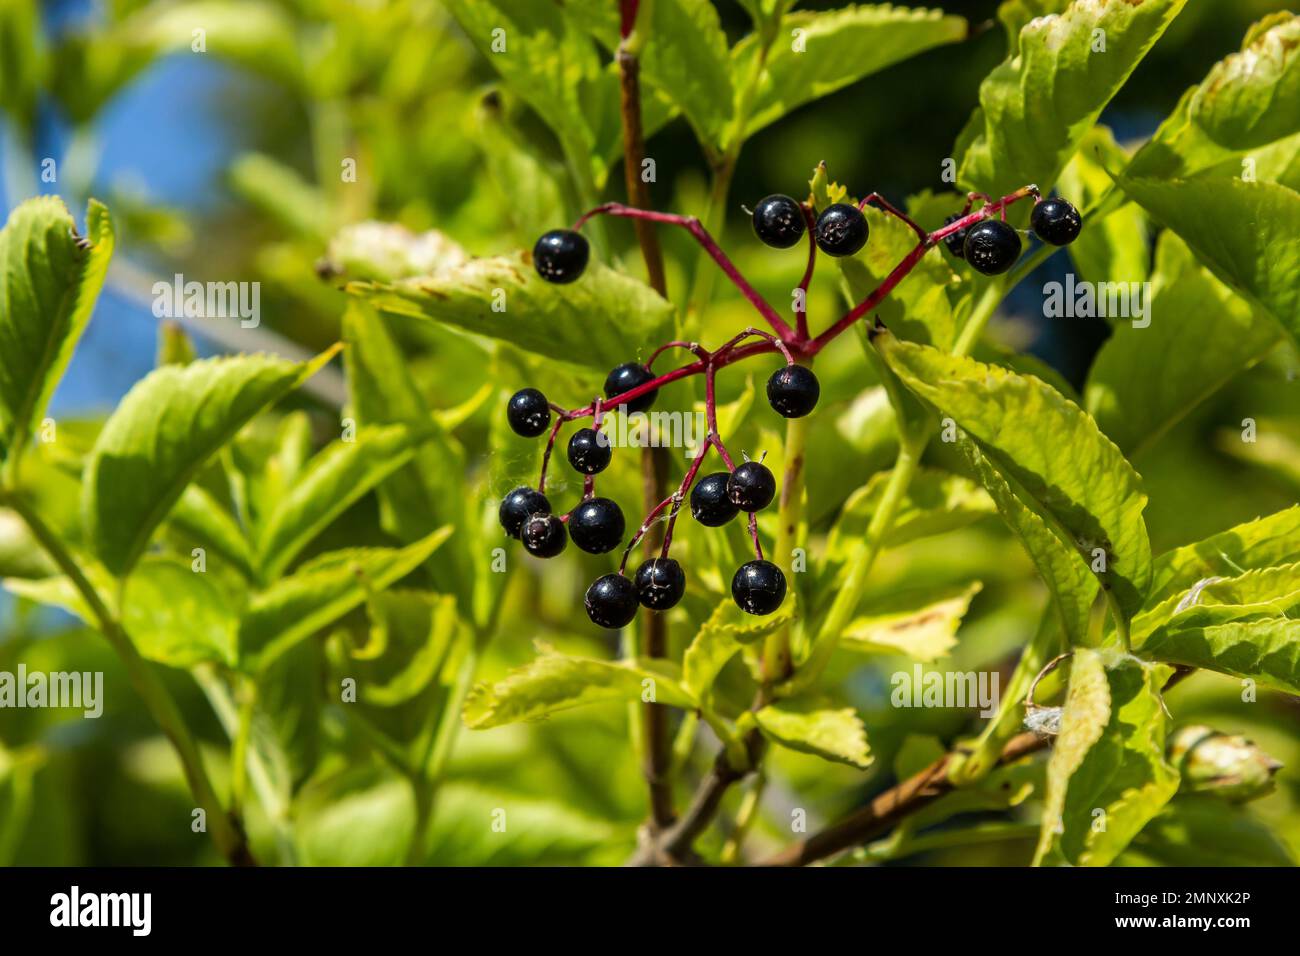 Sambucus nigra is a poisonous plant that can also be used medicinally. Stock Photo